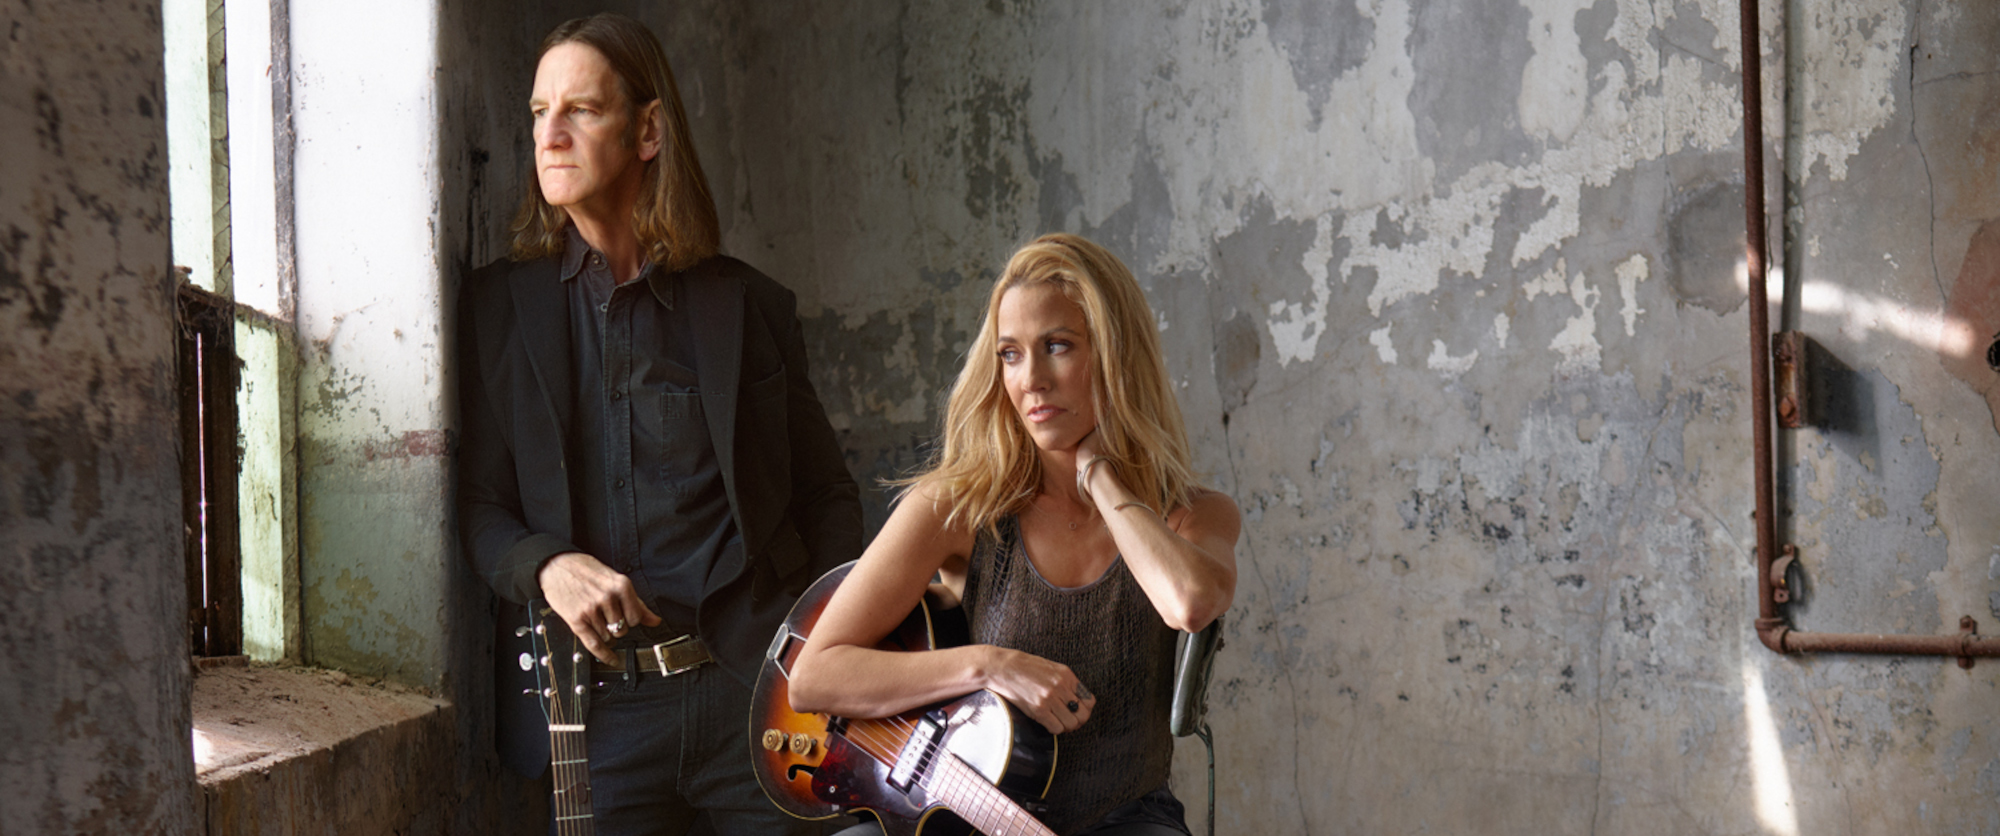 Rusty Truck Shares New Single “Find My Way” Featuring Sheryl Crow